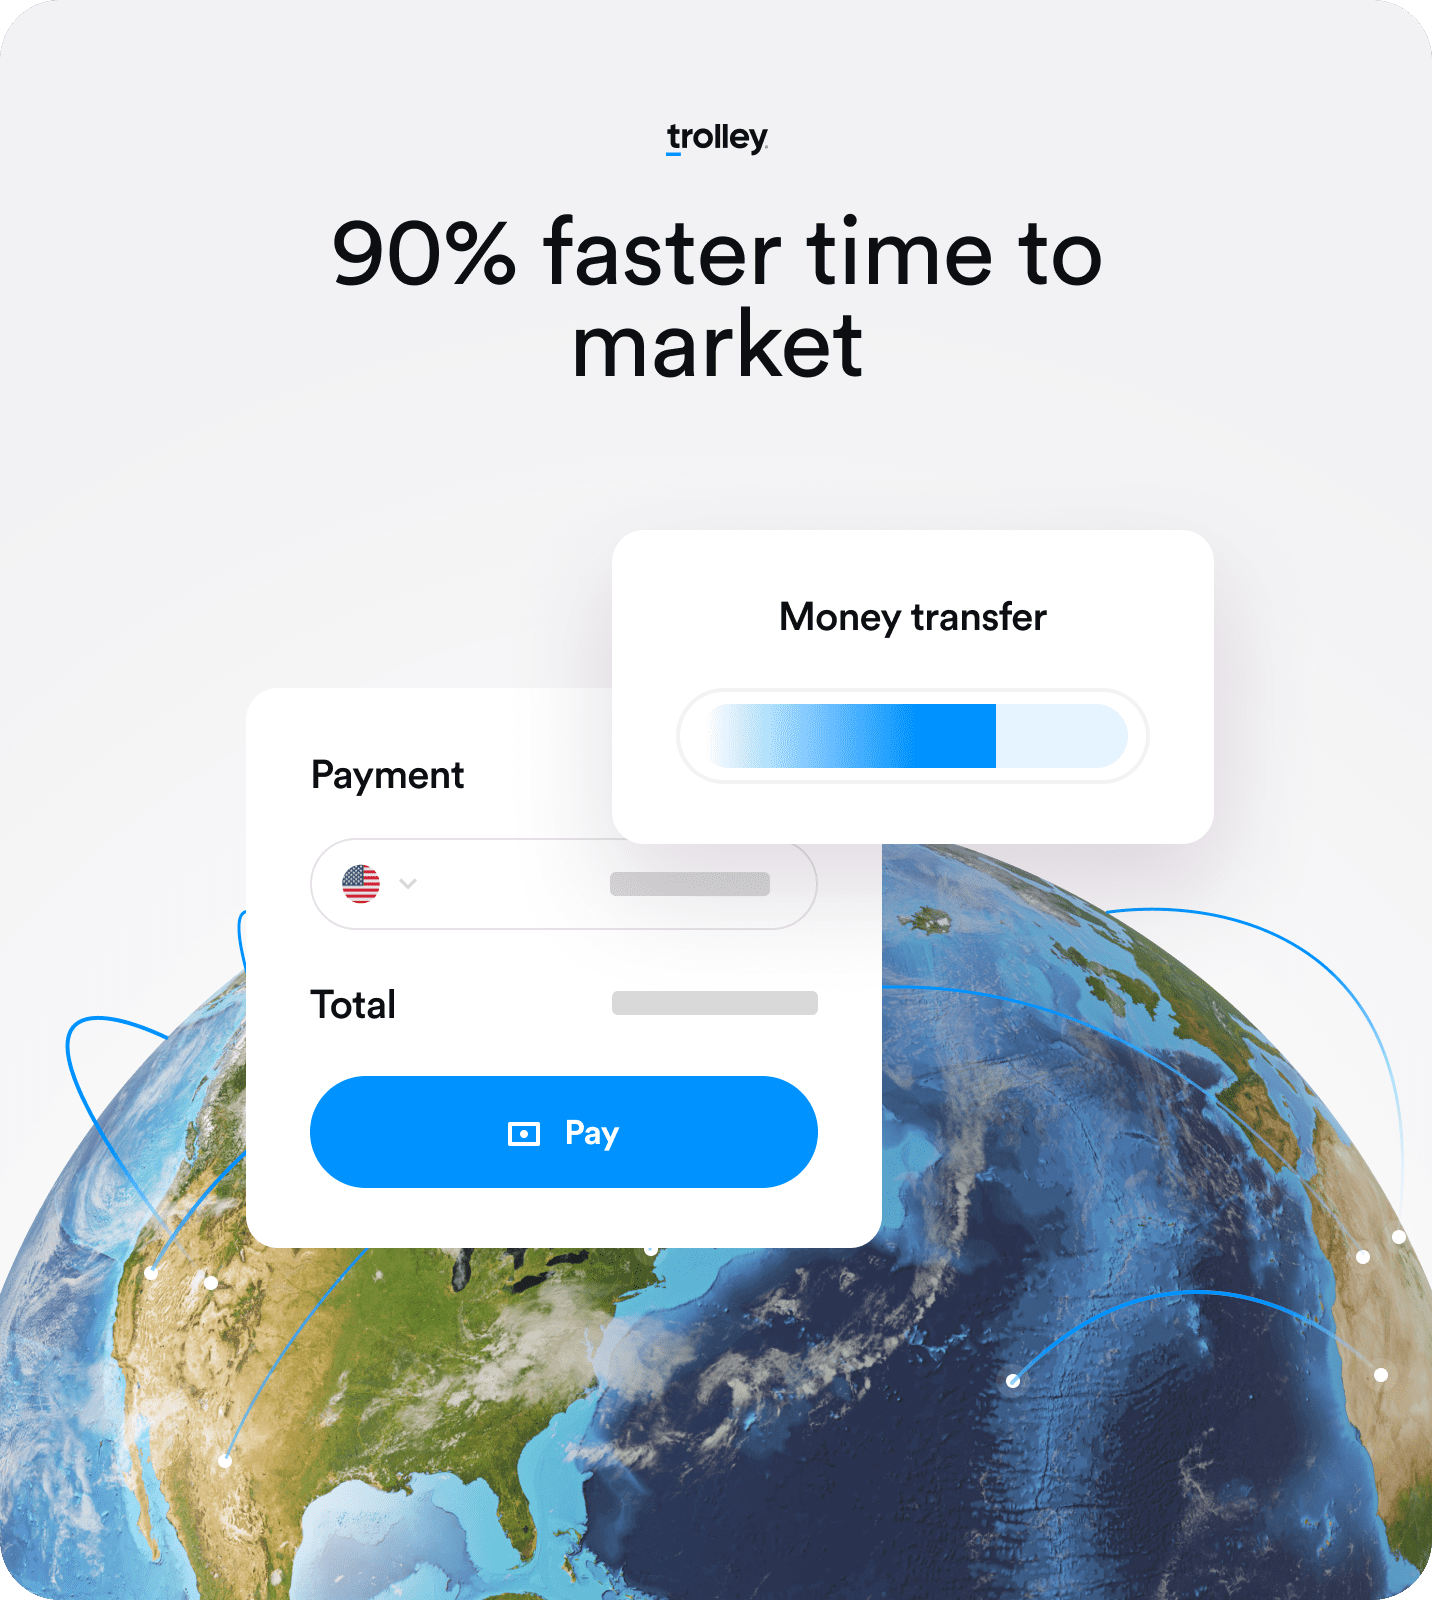 90% faster time to market